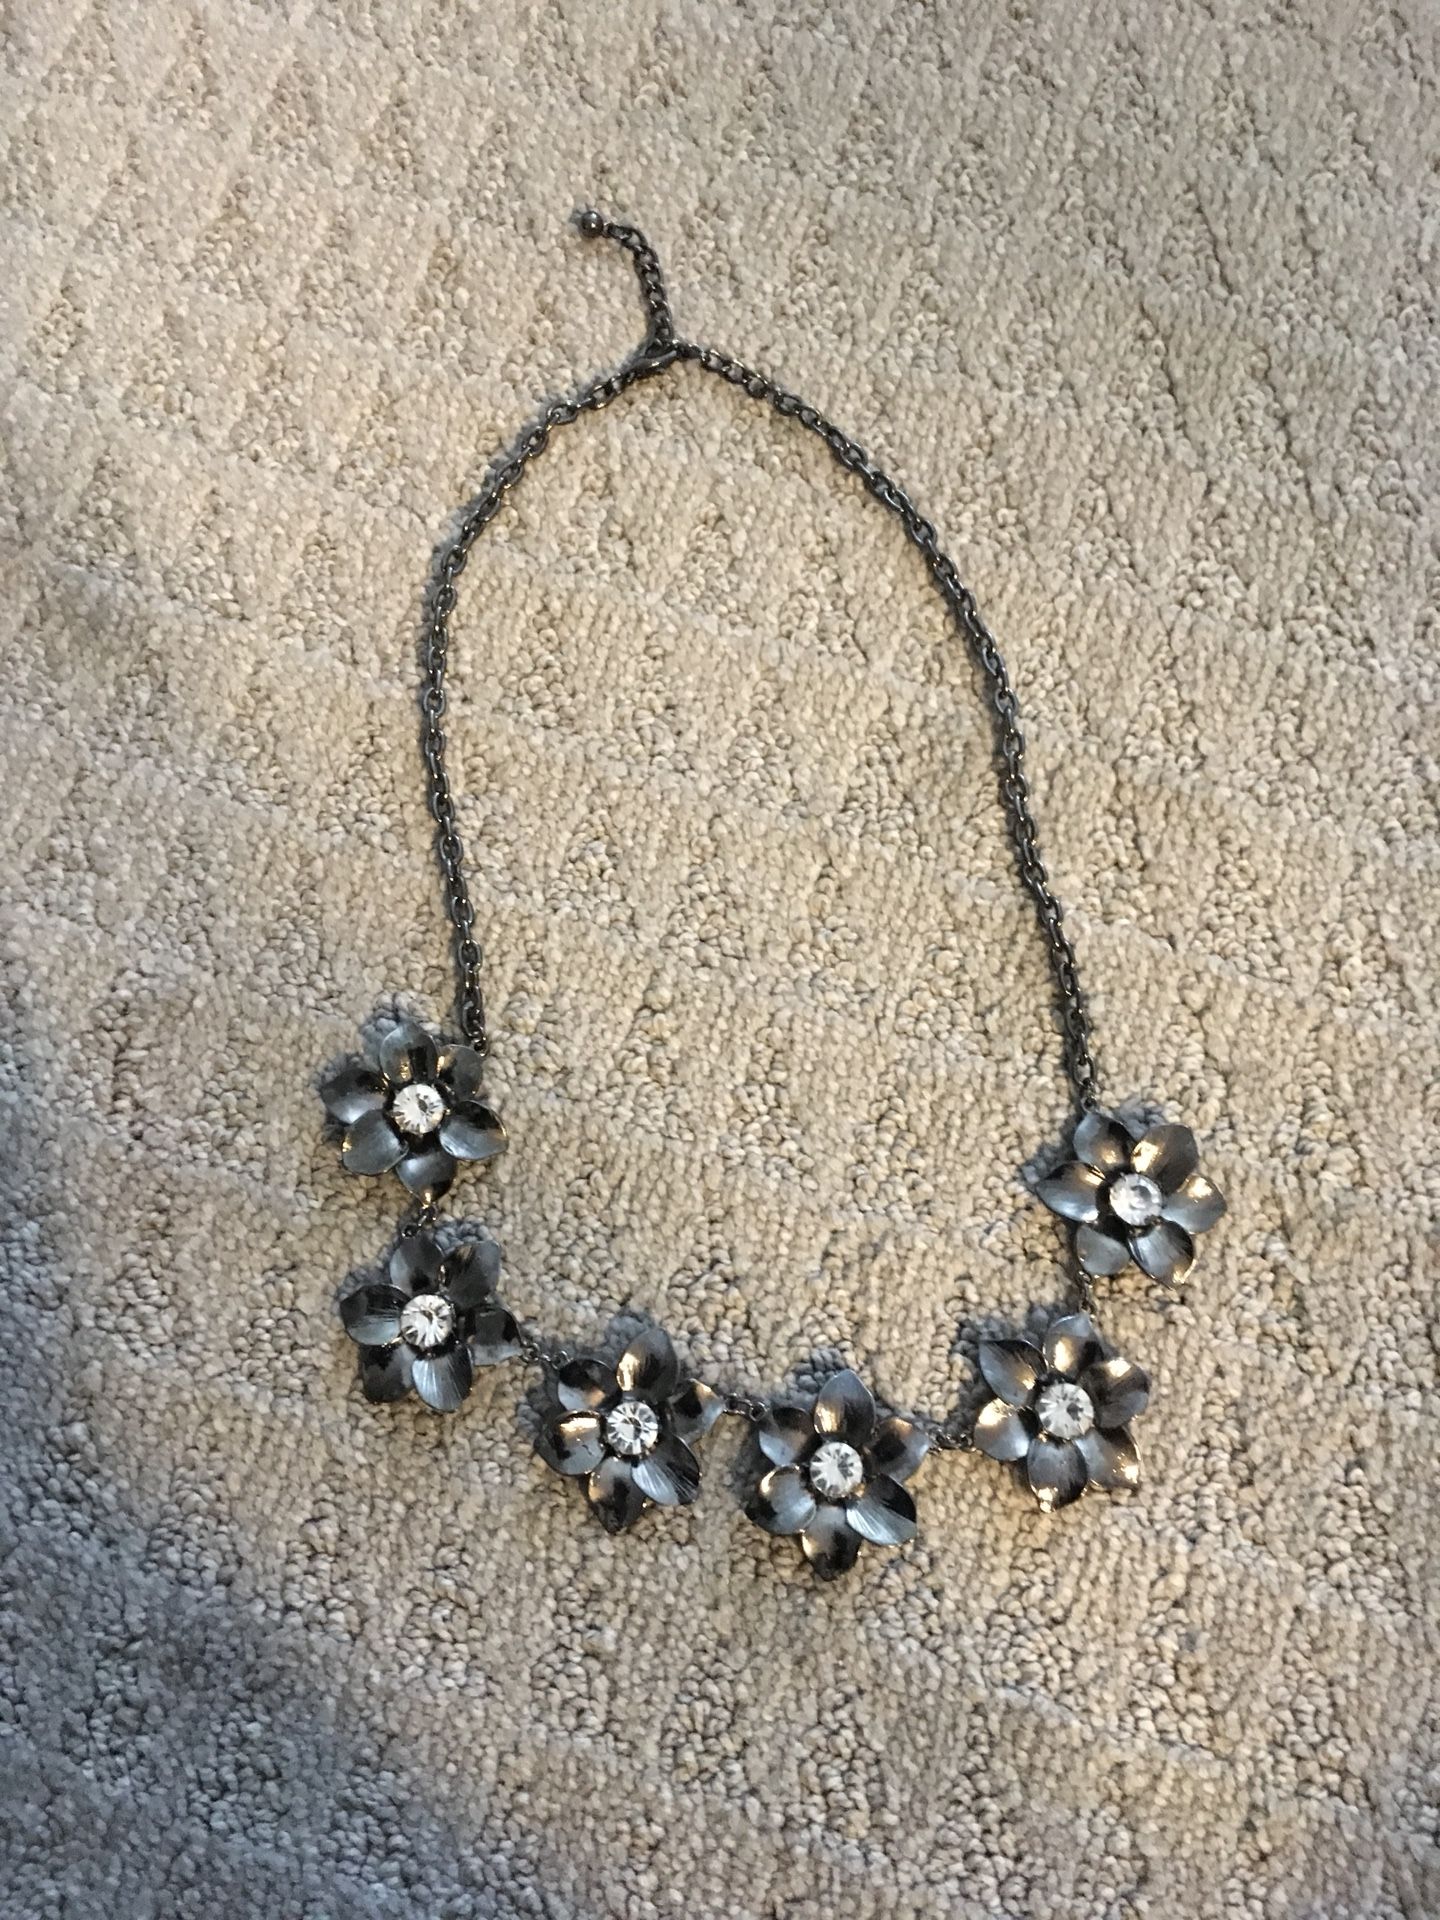 Dark Silver Flower Necklace with Faux Crystals, Statement Costume Jewelry